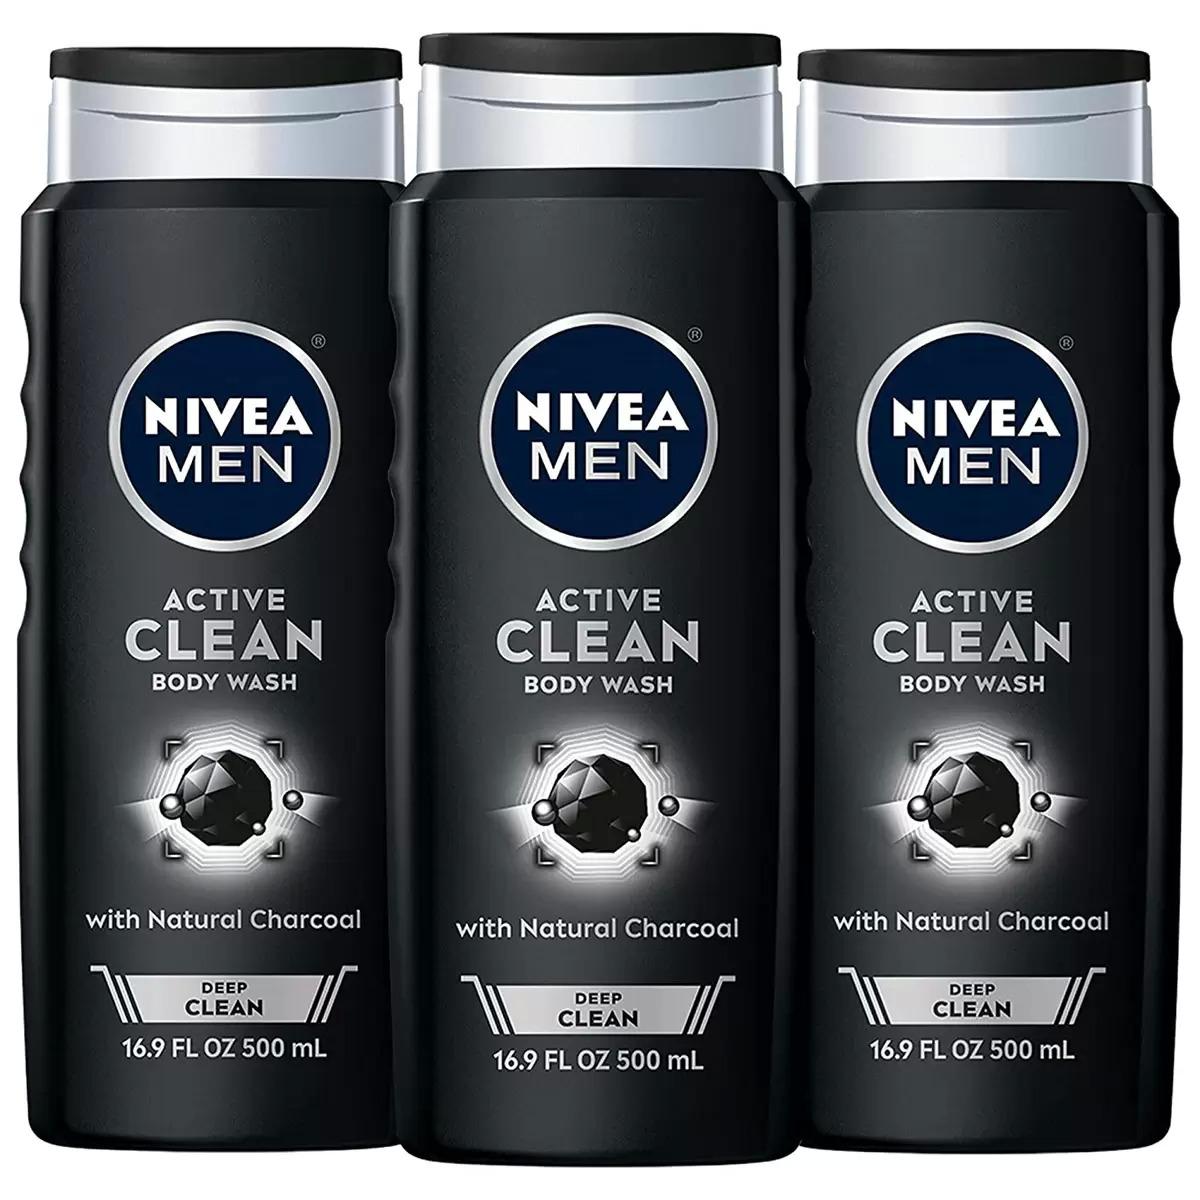 Nivea Mens Deep Clean Body Wash 3 Pack for $10.33 Shipped